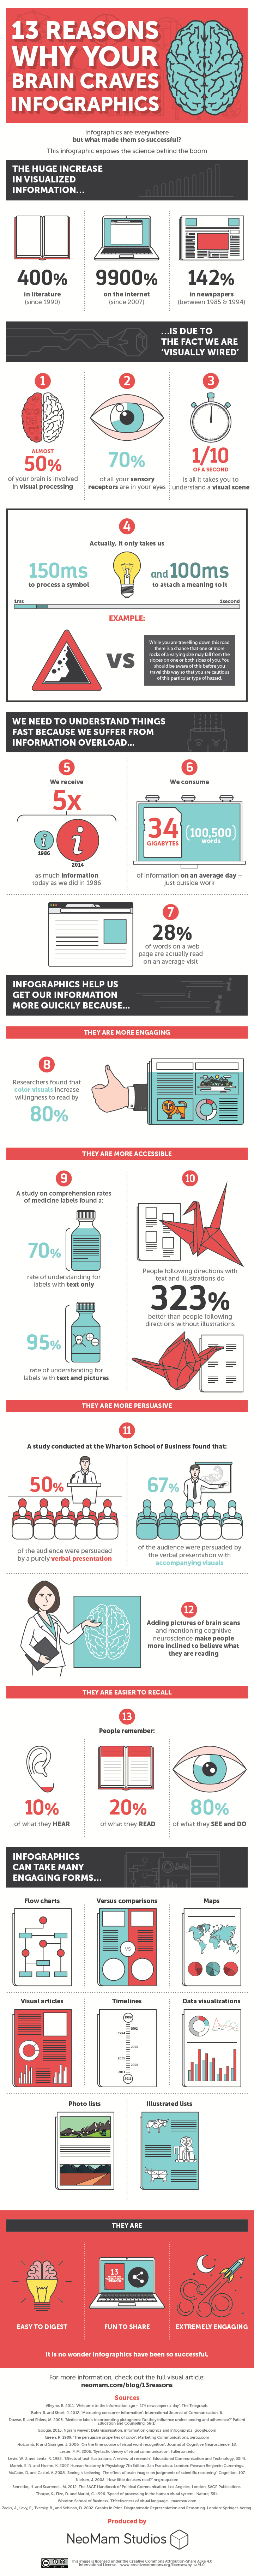 13 Scientific Reasons Explaining Why You Crave Infographics